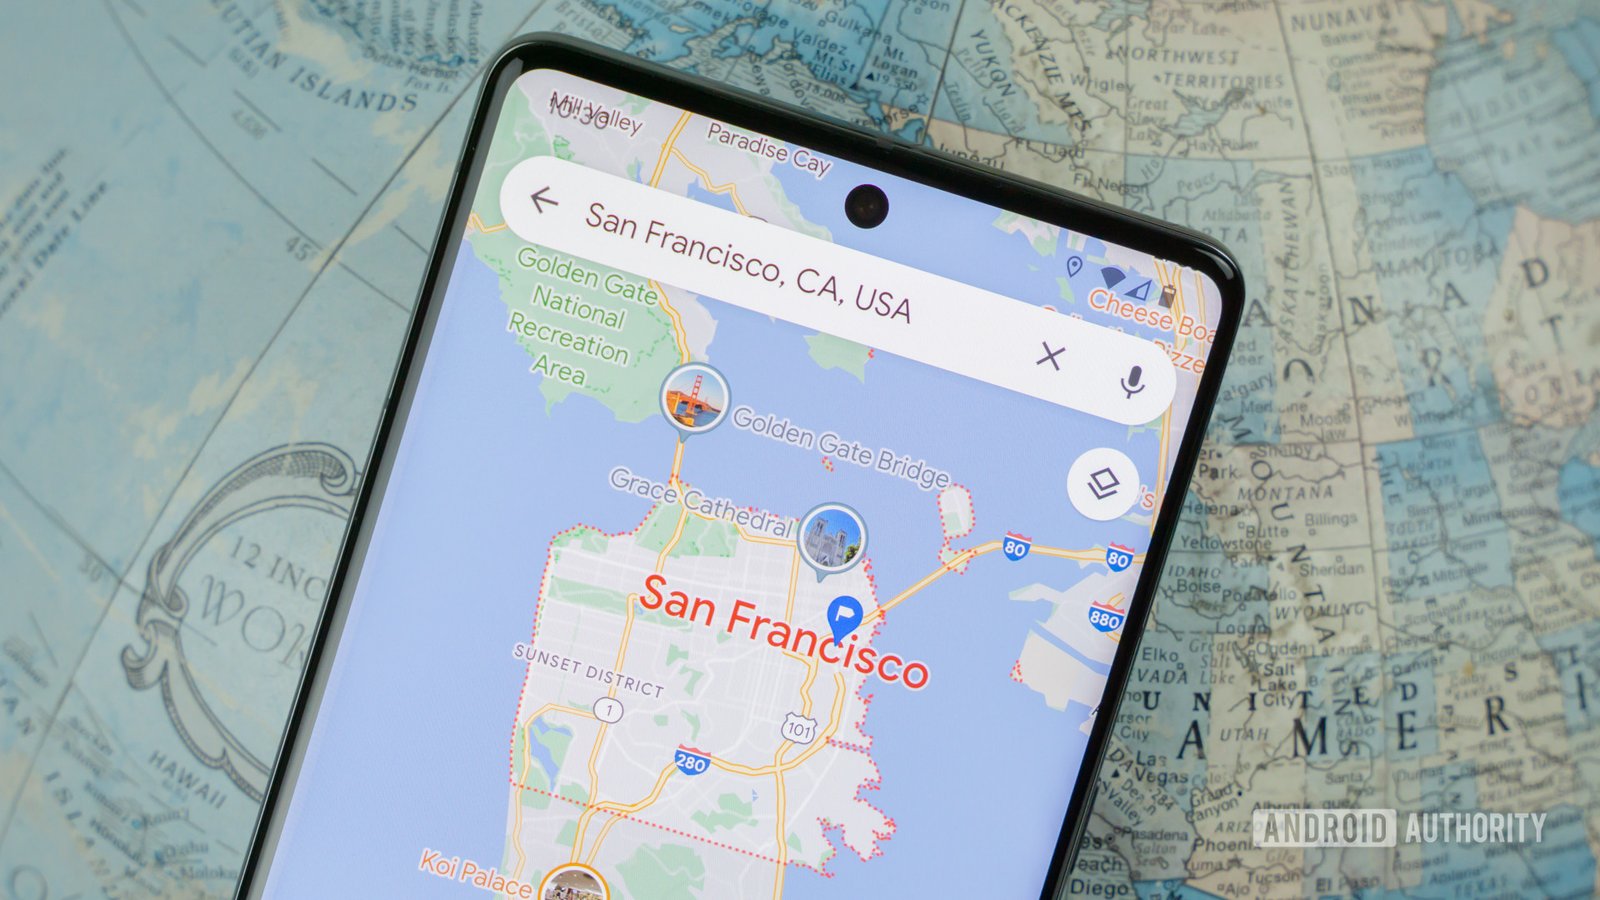 Google is adding more AI feature to Search, Maps, and Shopping